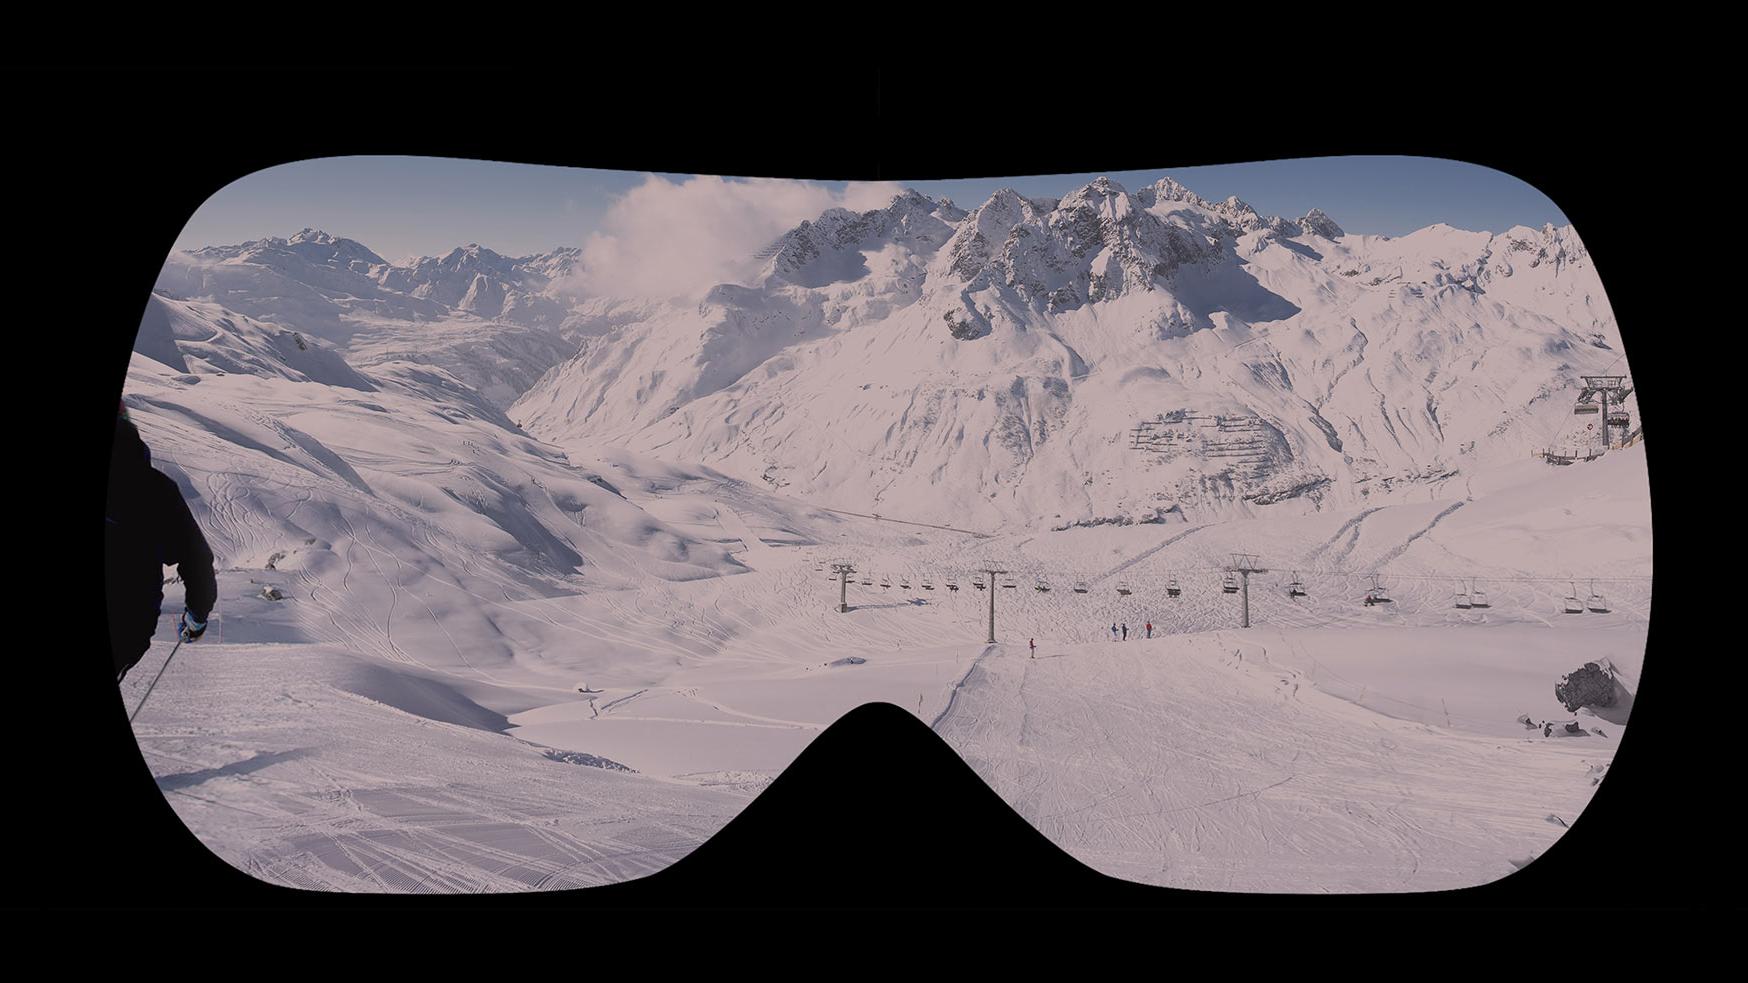 Field of view of standard snow goggles